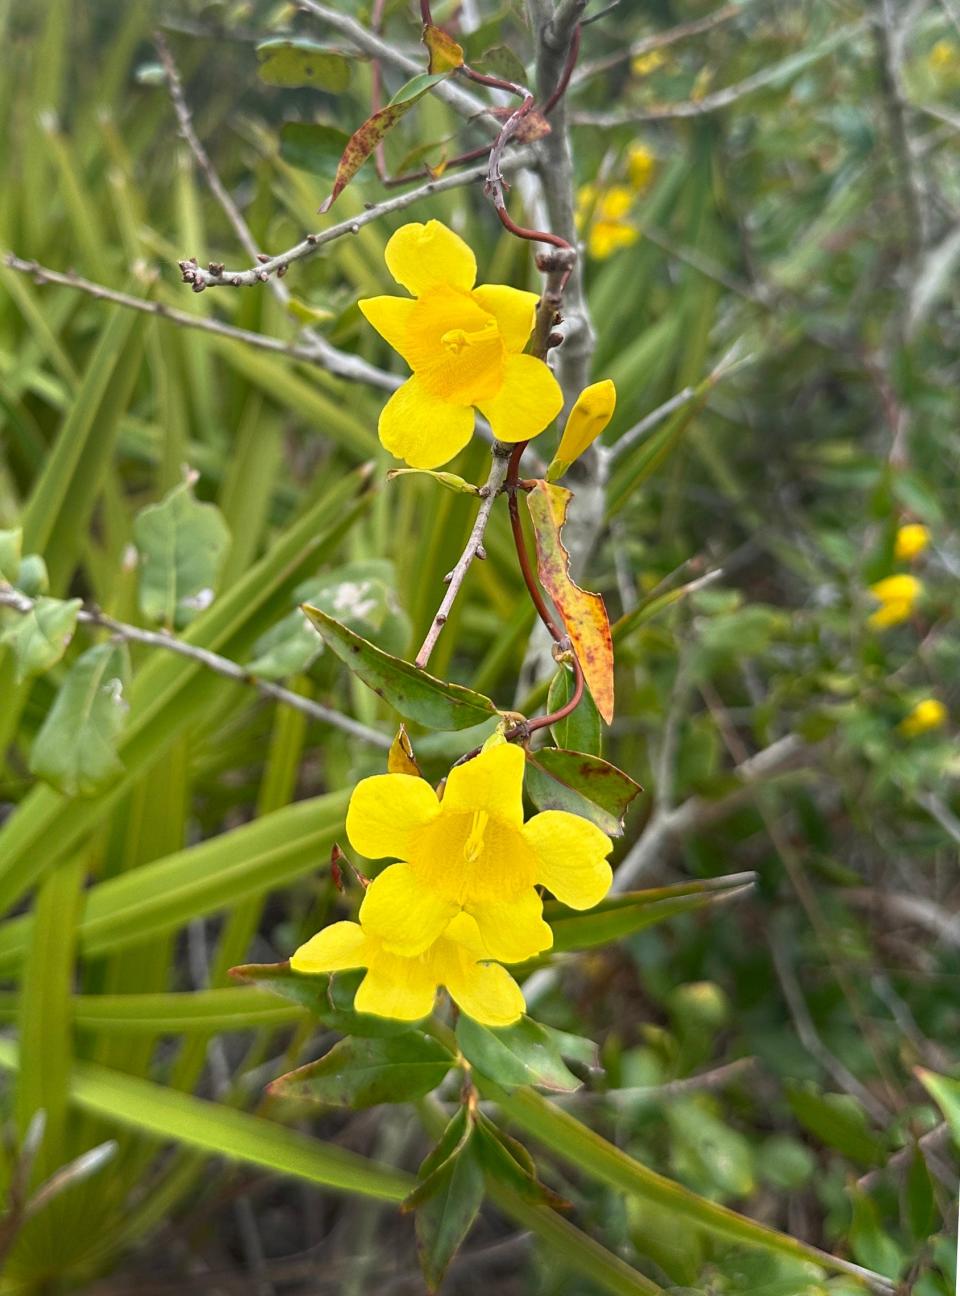 Yellow jessamine, a Florida native plant, is starting to bloom along the trail to Deep Hole.